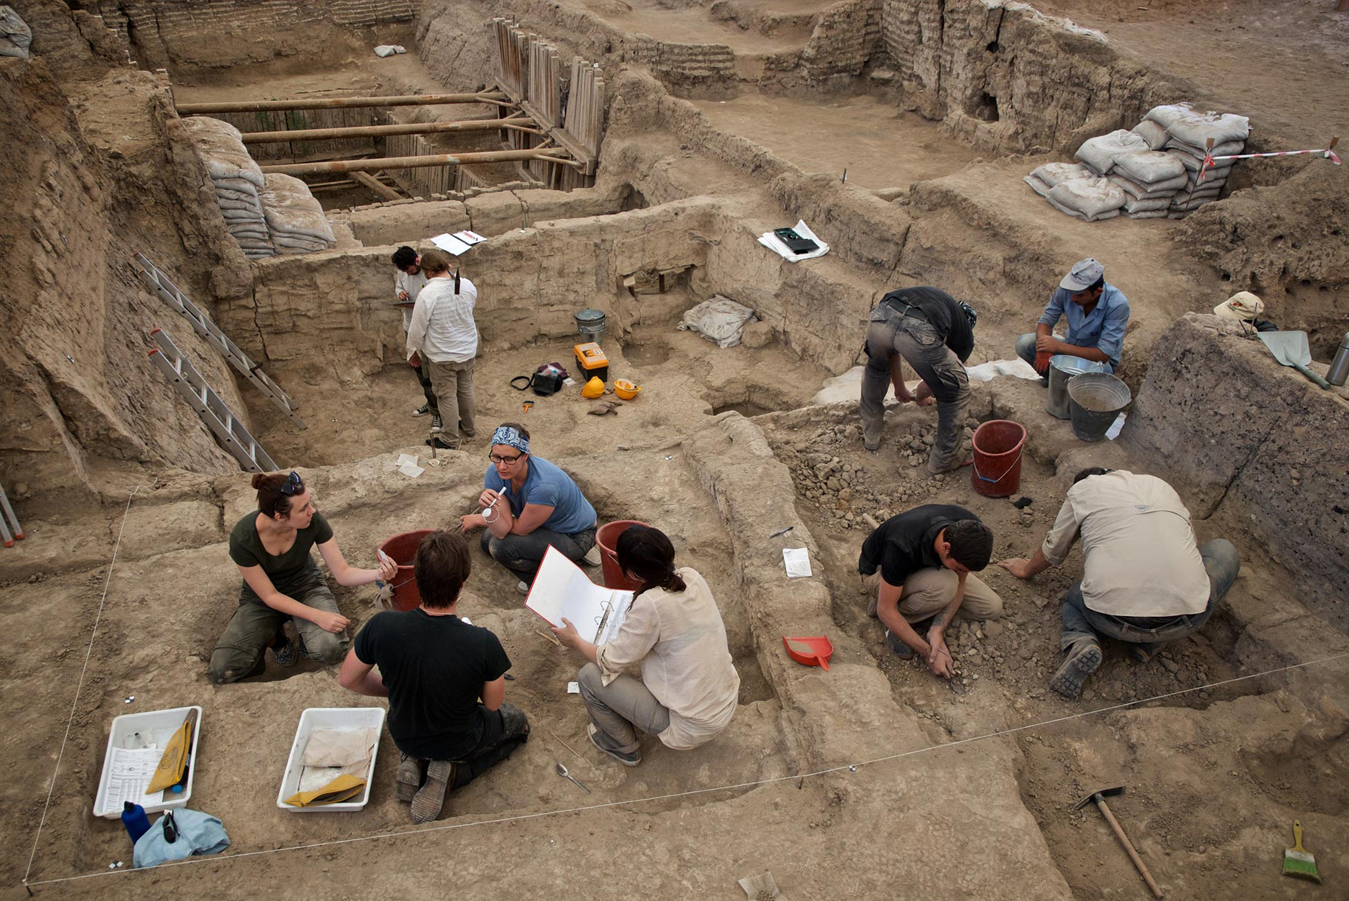 The Top Ten Discoveries in 2020 in Biblical Archaeology